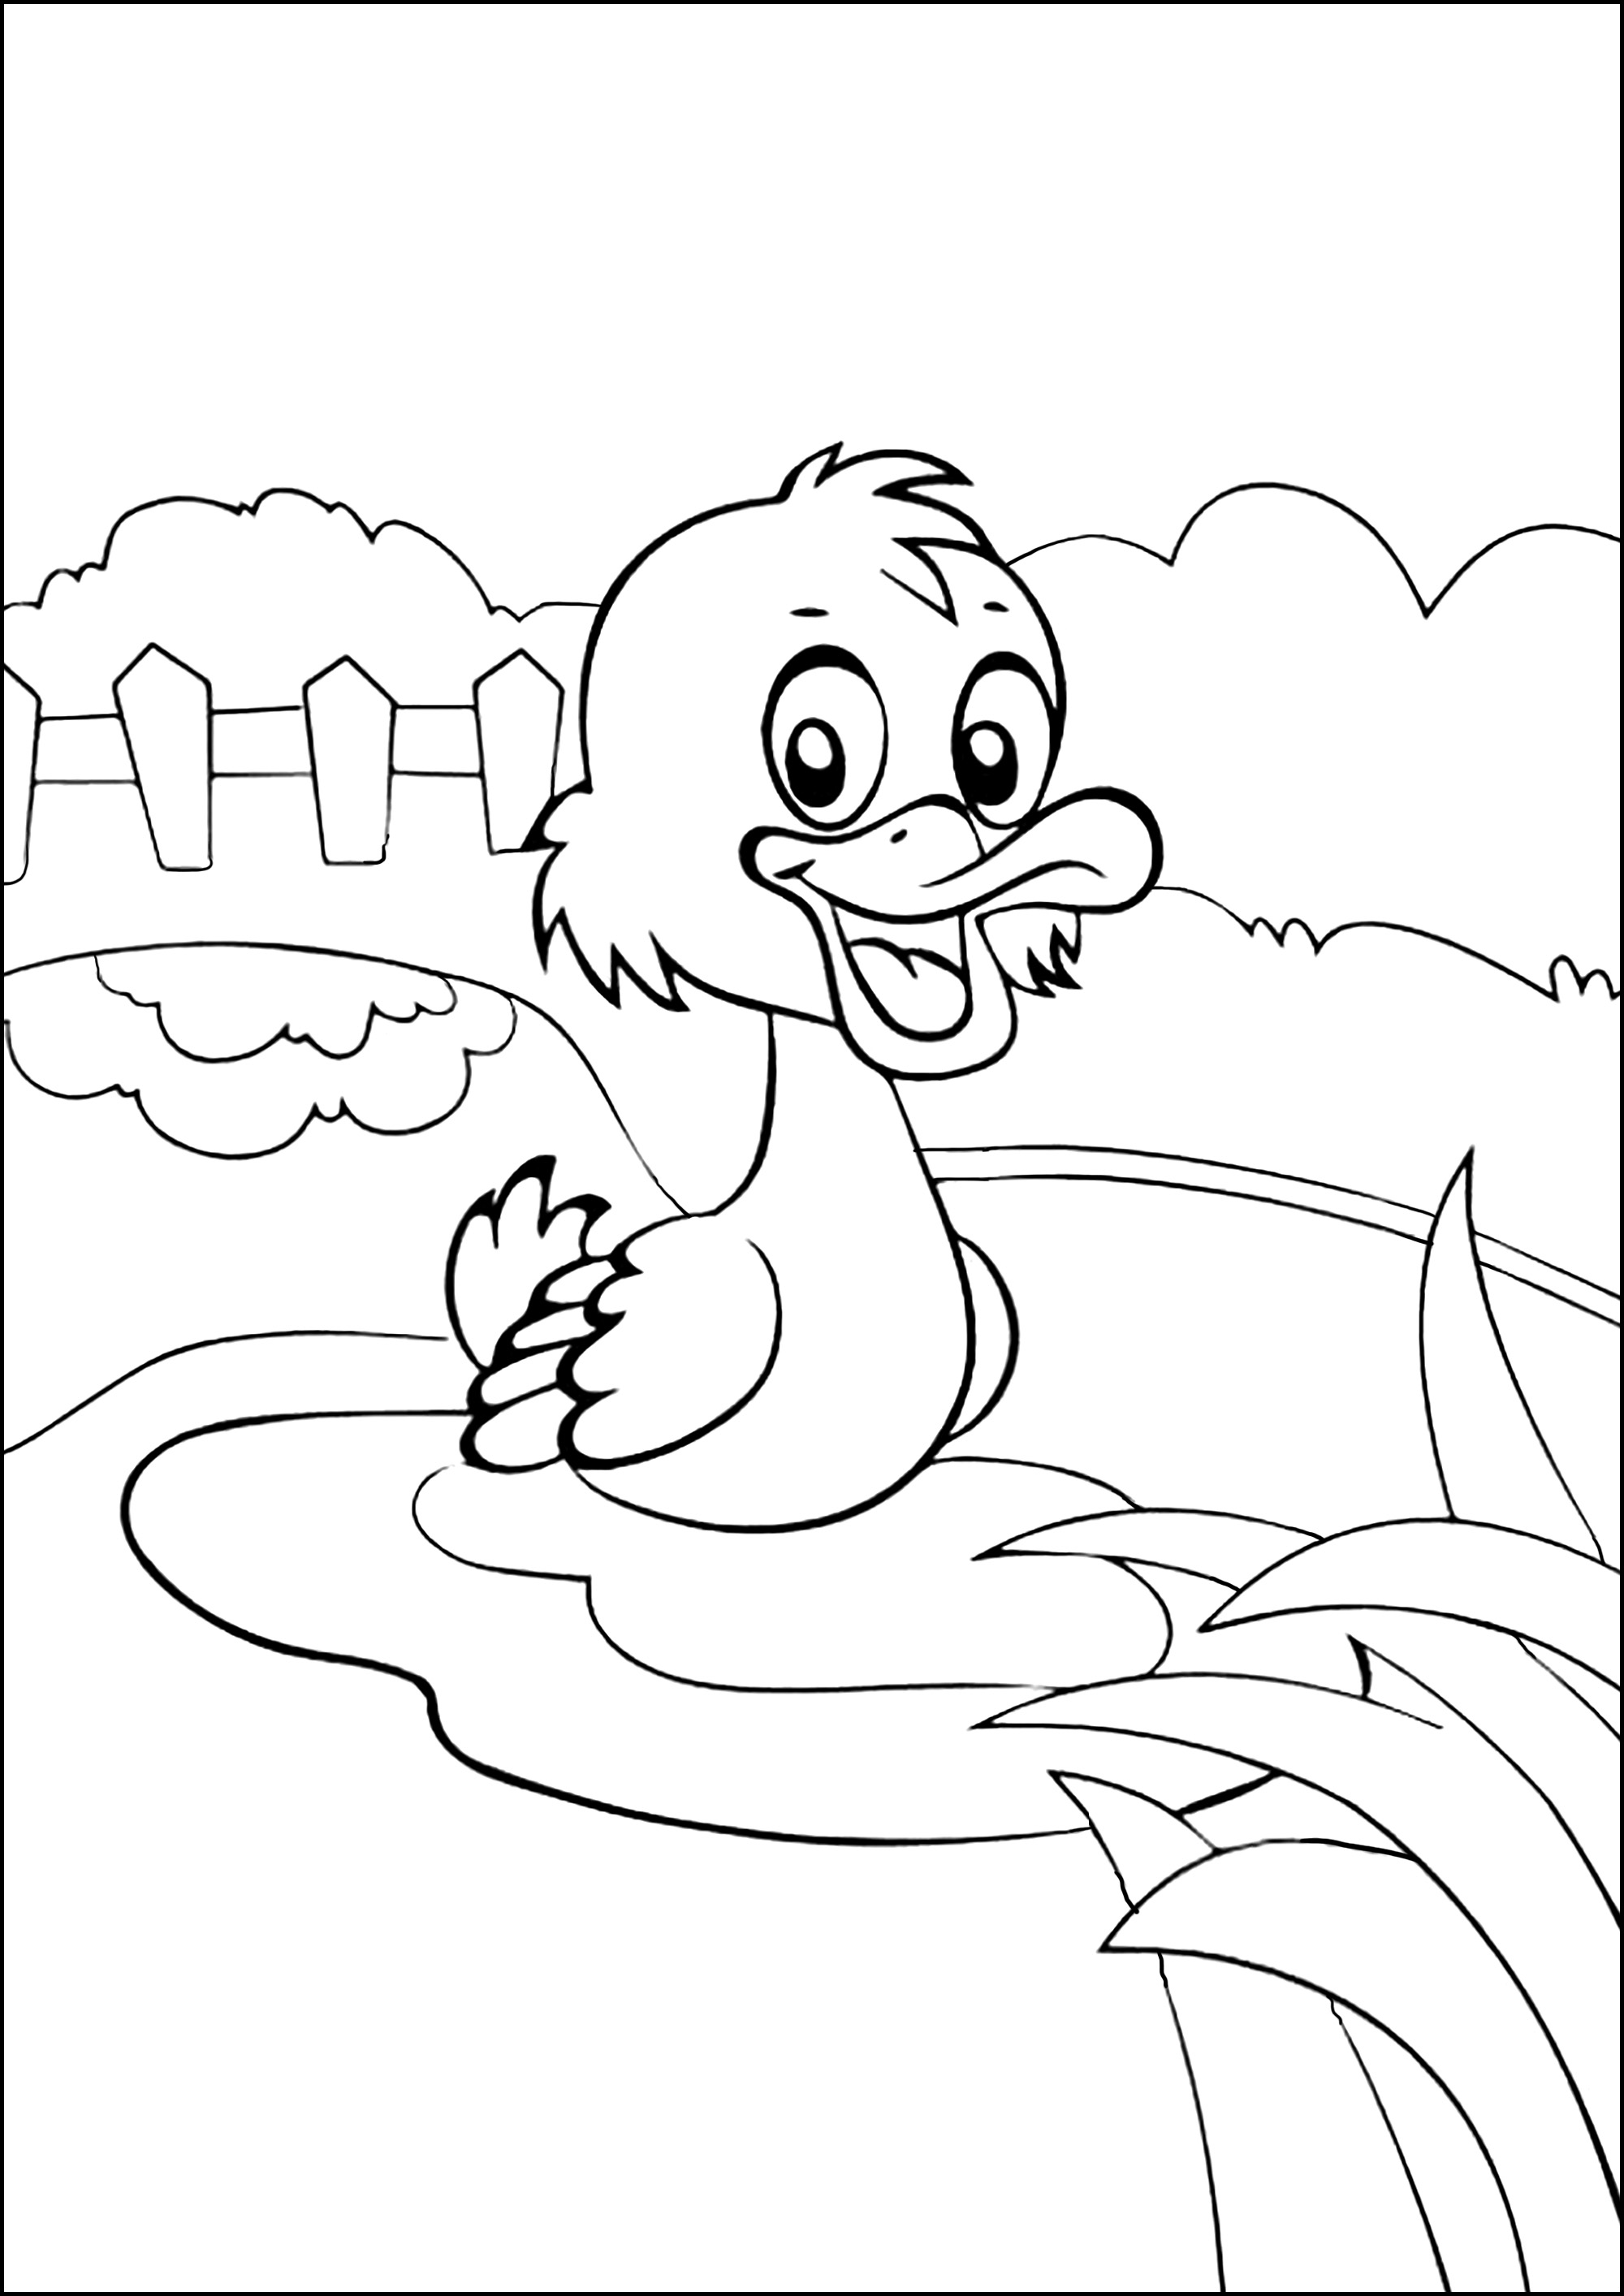 Happy duck in a pond - Birds Kids Coloring Pages